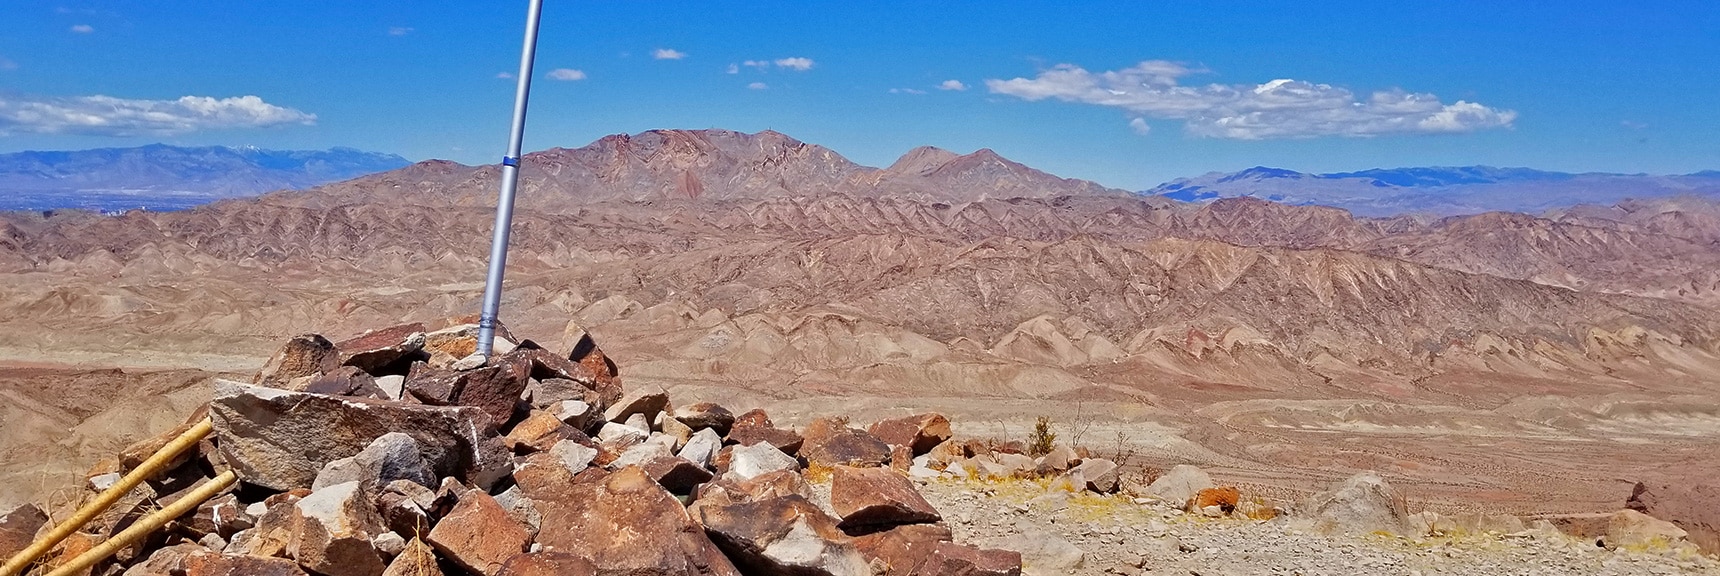 Frenchman Mt. and Mt. Charleston Wilderness from the Summit | Lava Butte | Lake Mead National Recreation Area, Nevada